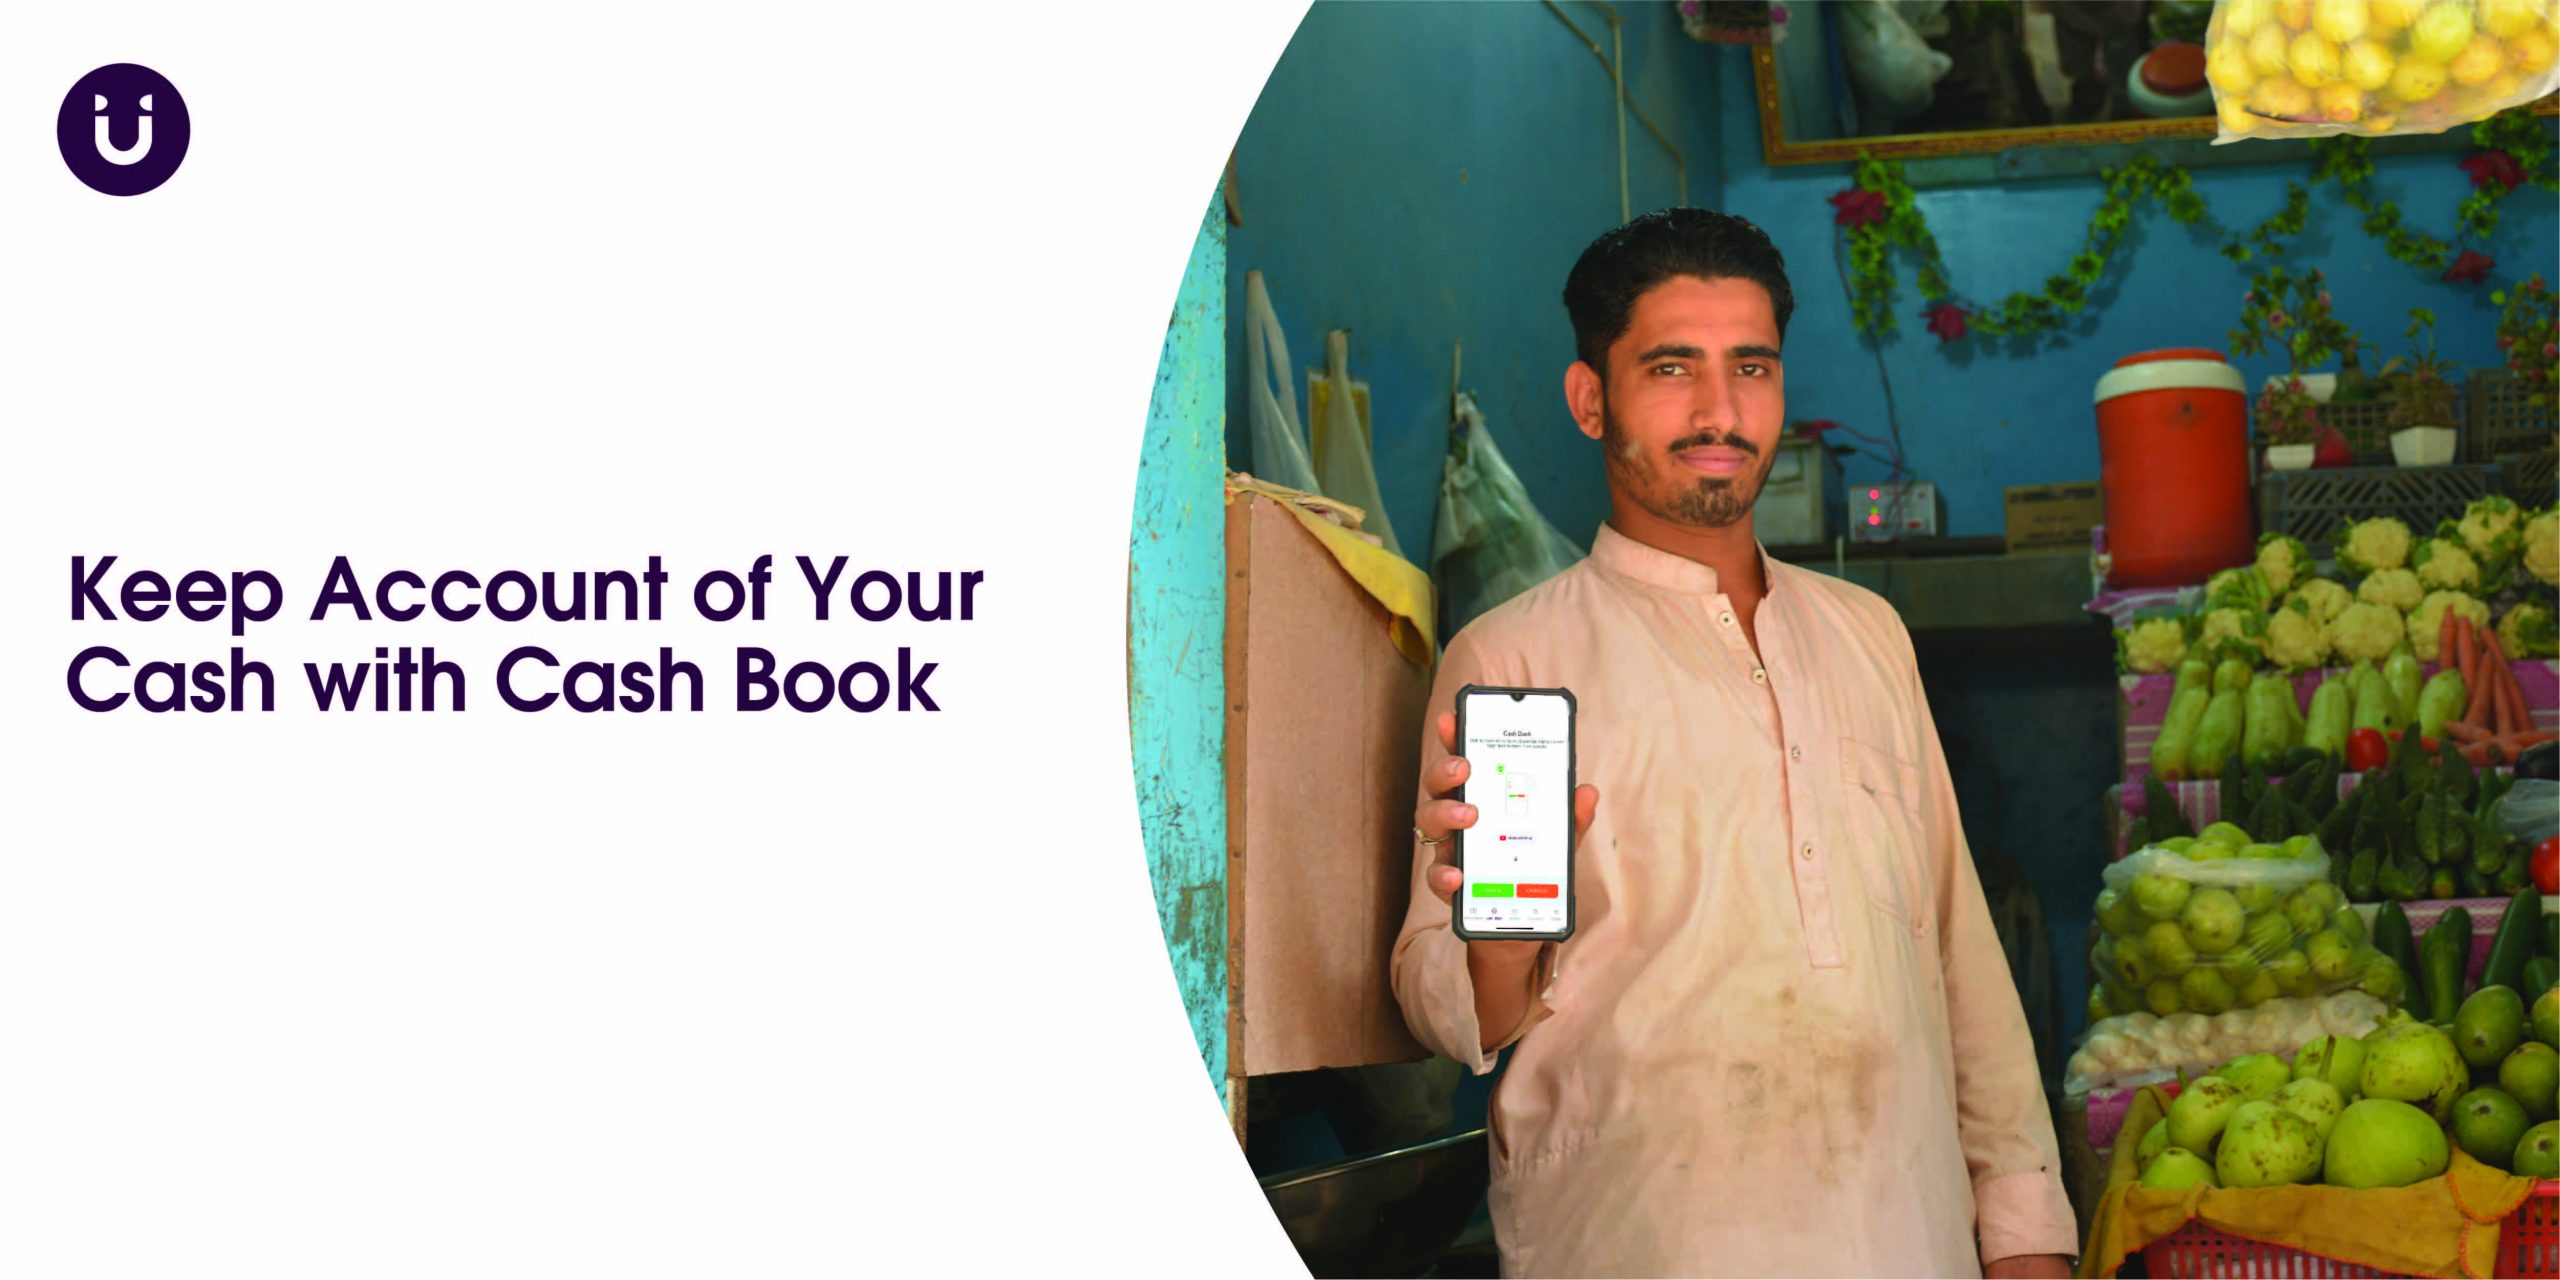 Keep Account of Your Cash with Cash Book